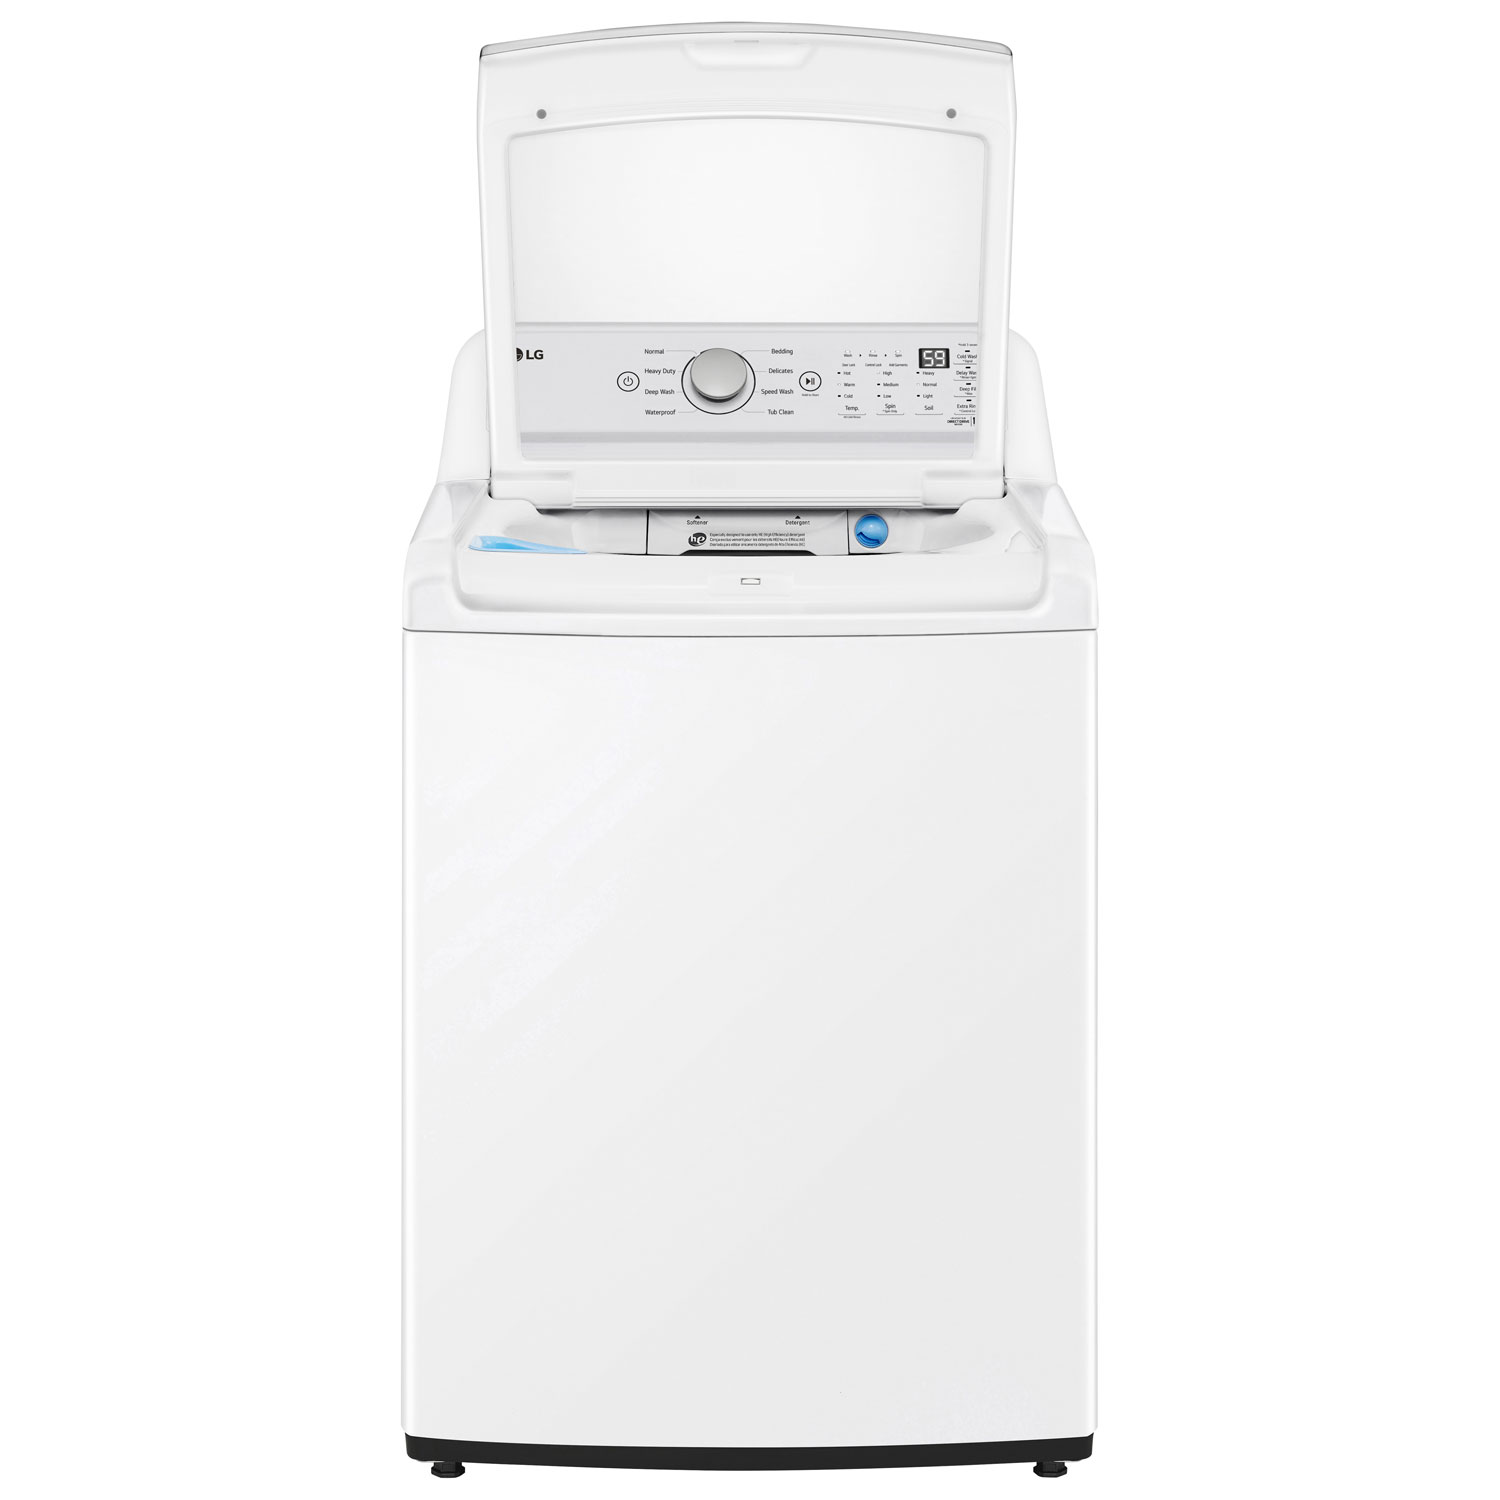 LG 5.6 Cu. Ft. High Efficiency Top Load Washer (WT7155CW) - White